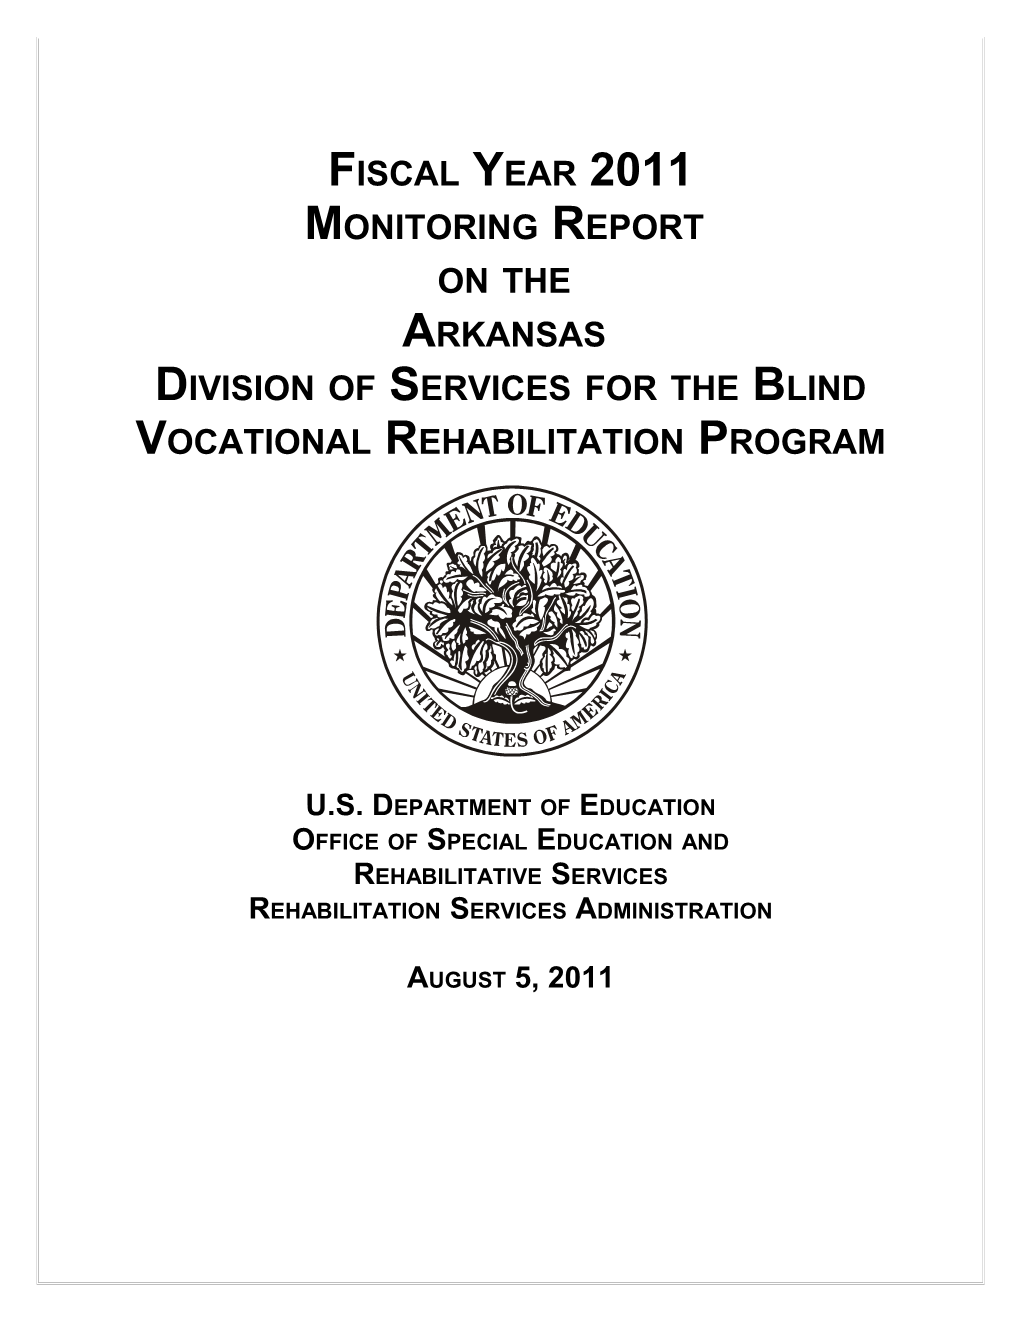 Fiscal Year 2011 Monitoring Report on the Arkansas Division of Services for the Blind Vocational